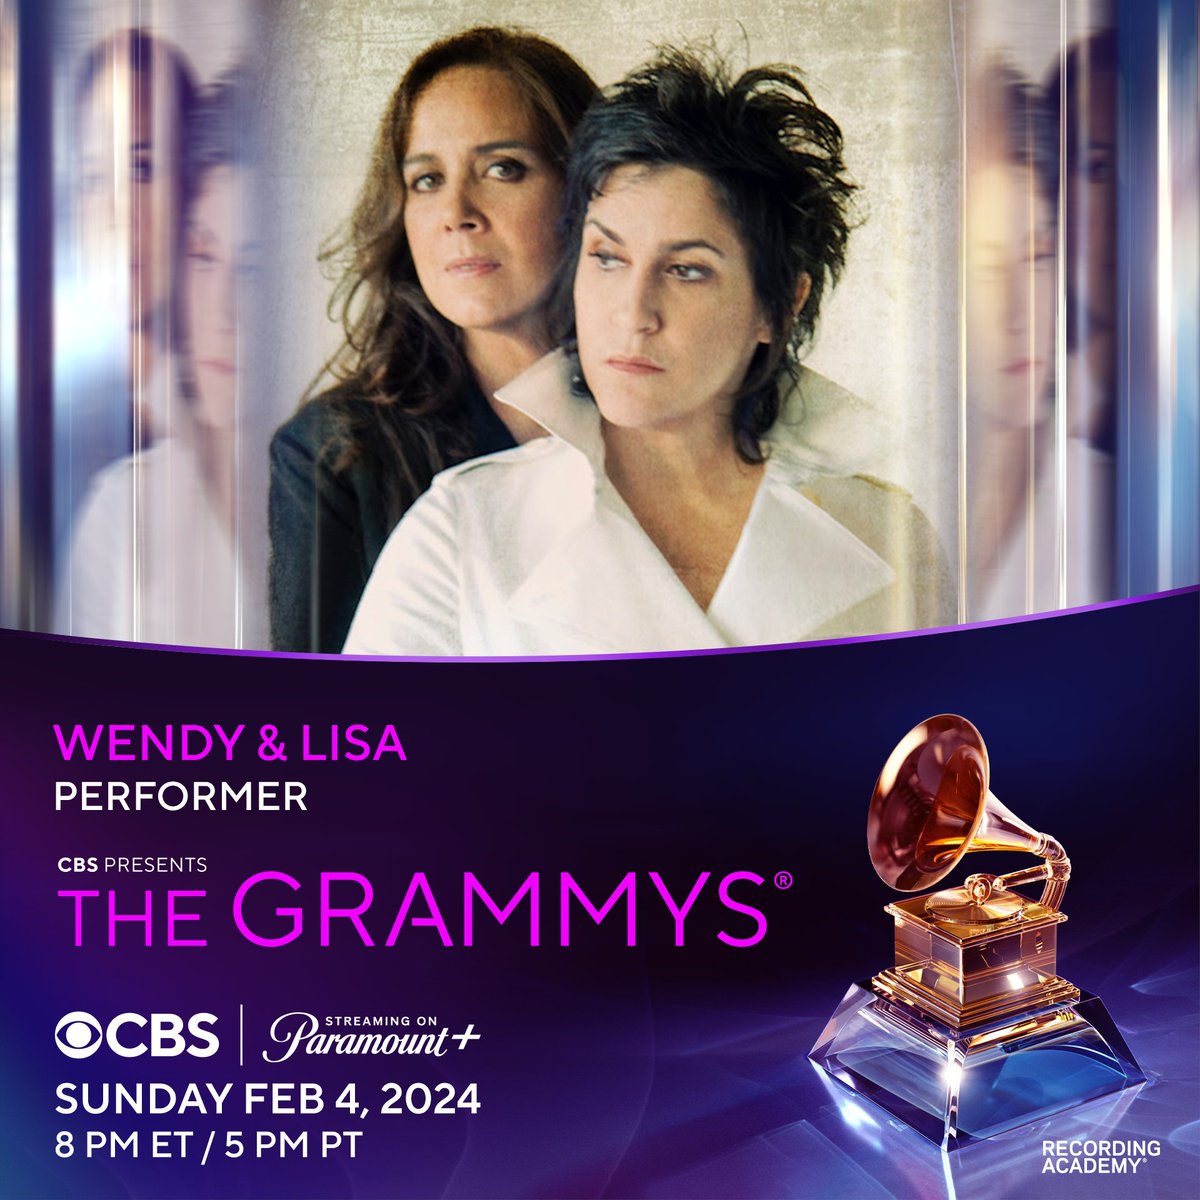 🎶 See @annielennox featuring @wendyandlisa perform at the #GRAMMYs! 🎶 Watch LIVE this Sunday, Feb. 4, at 8 PM ET / 5 PM PT on @CBS.